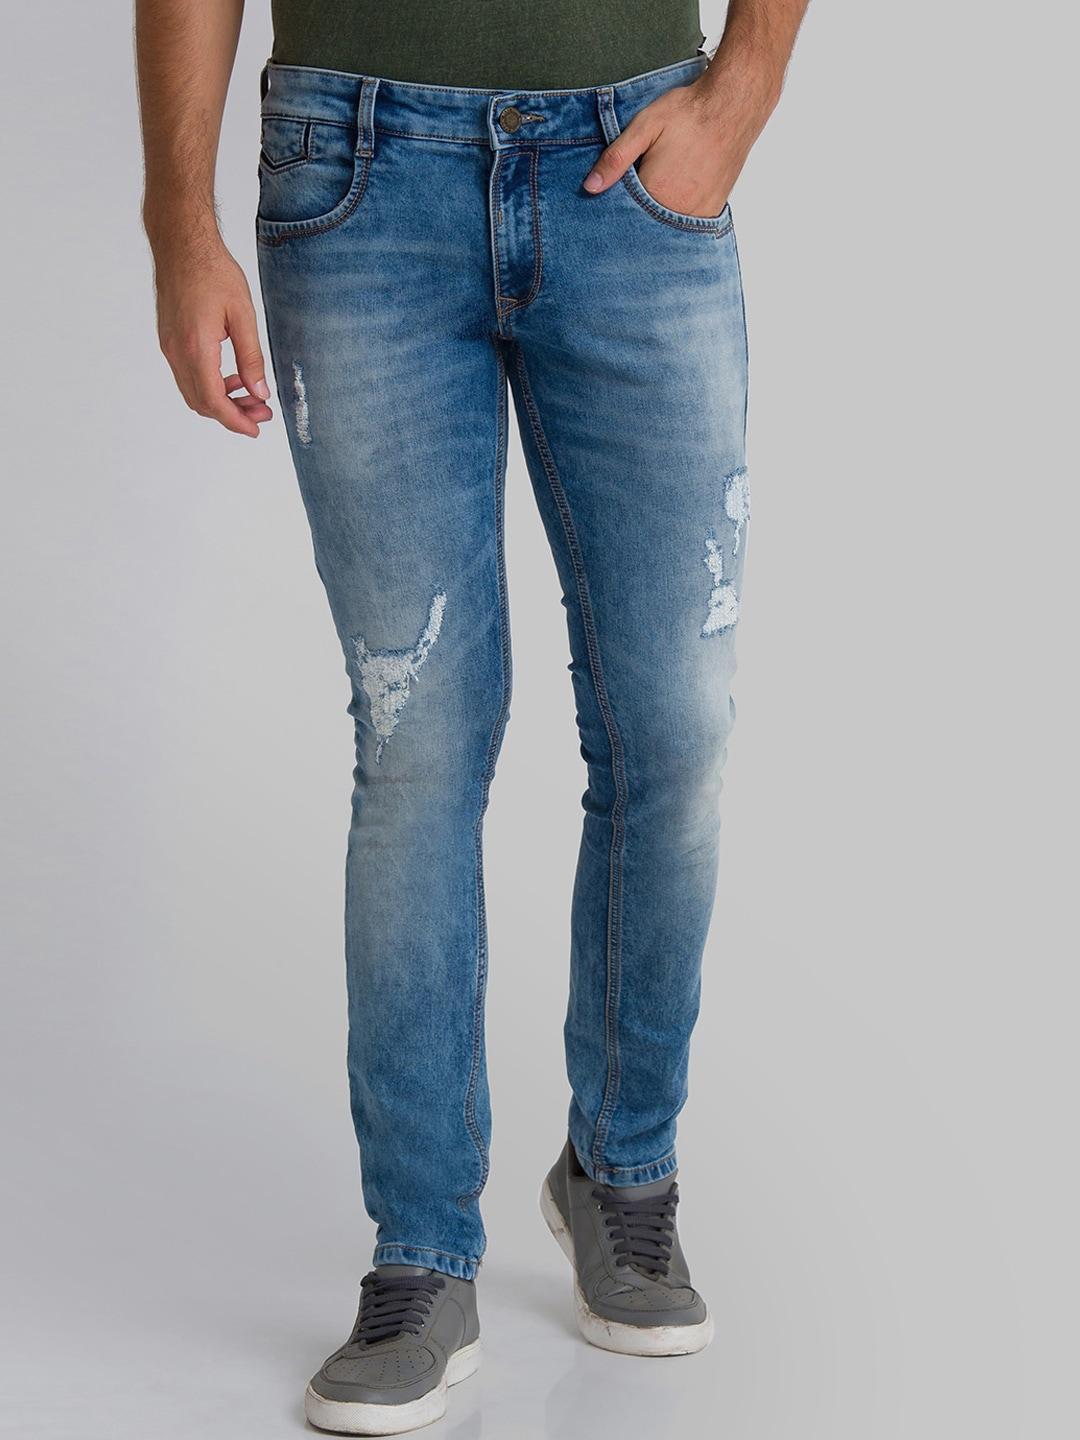 parx-men-blue-skinny-fit-mildly-distressed-heavy-fade-jeans